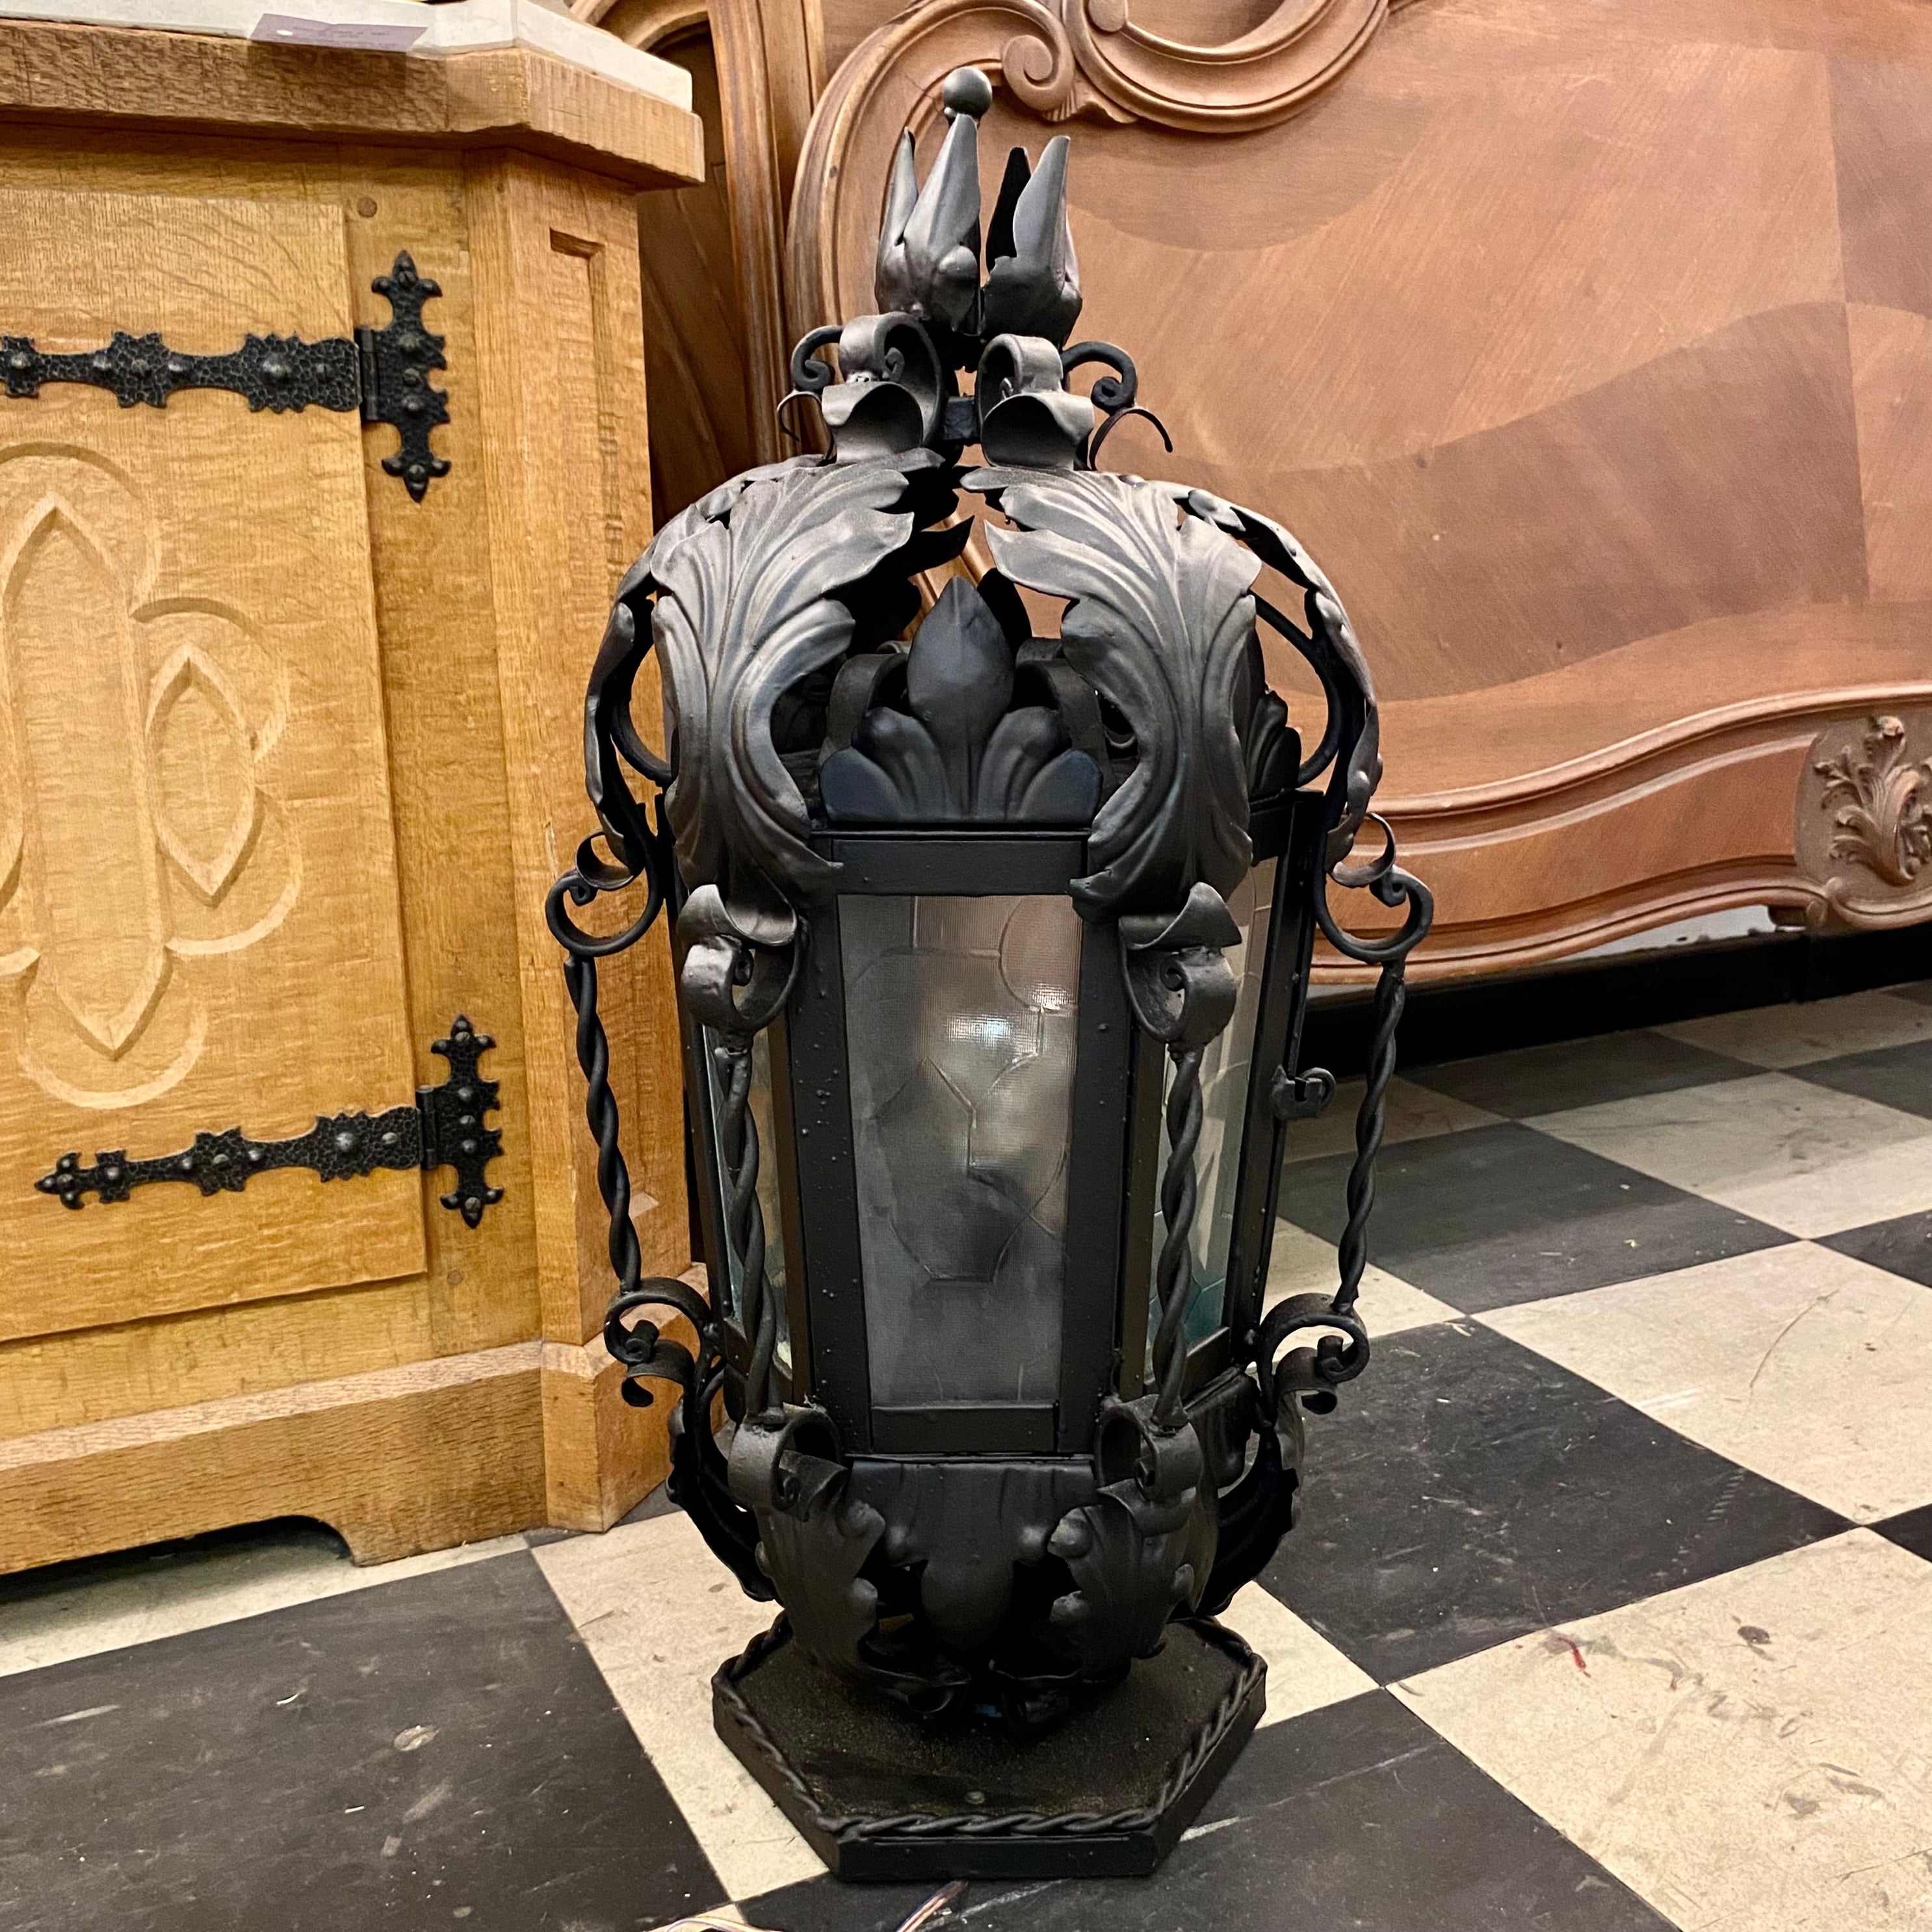 Antique Wrought Iron Lanterns with Aged Glass